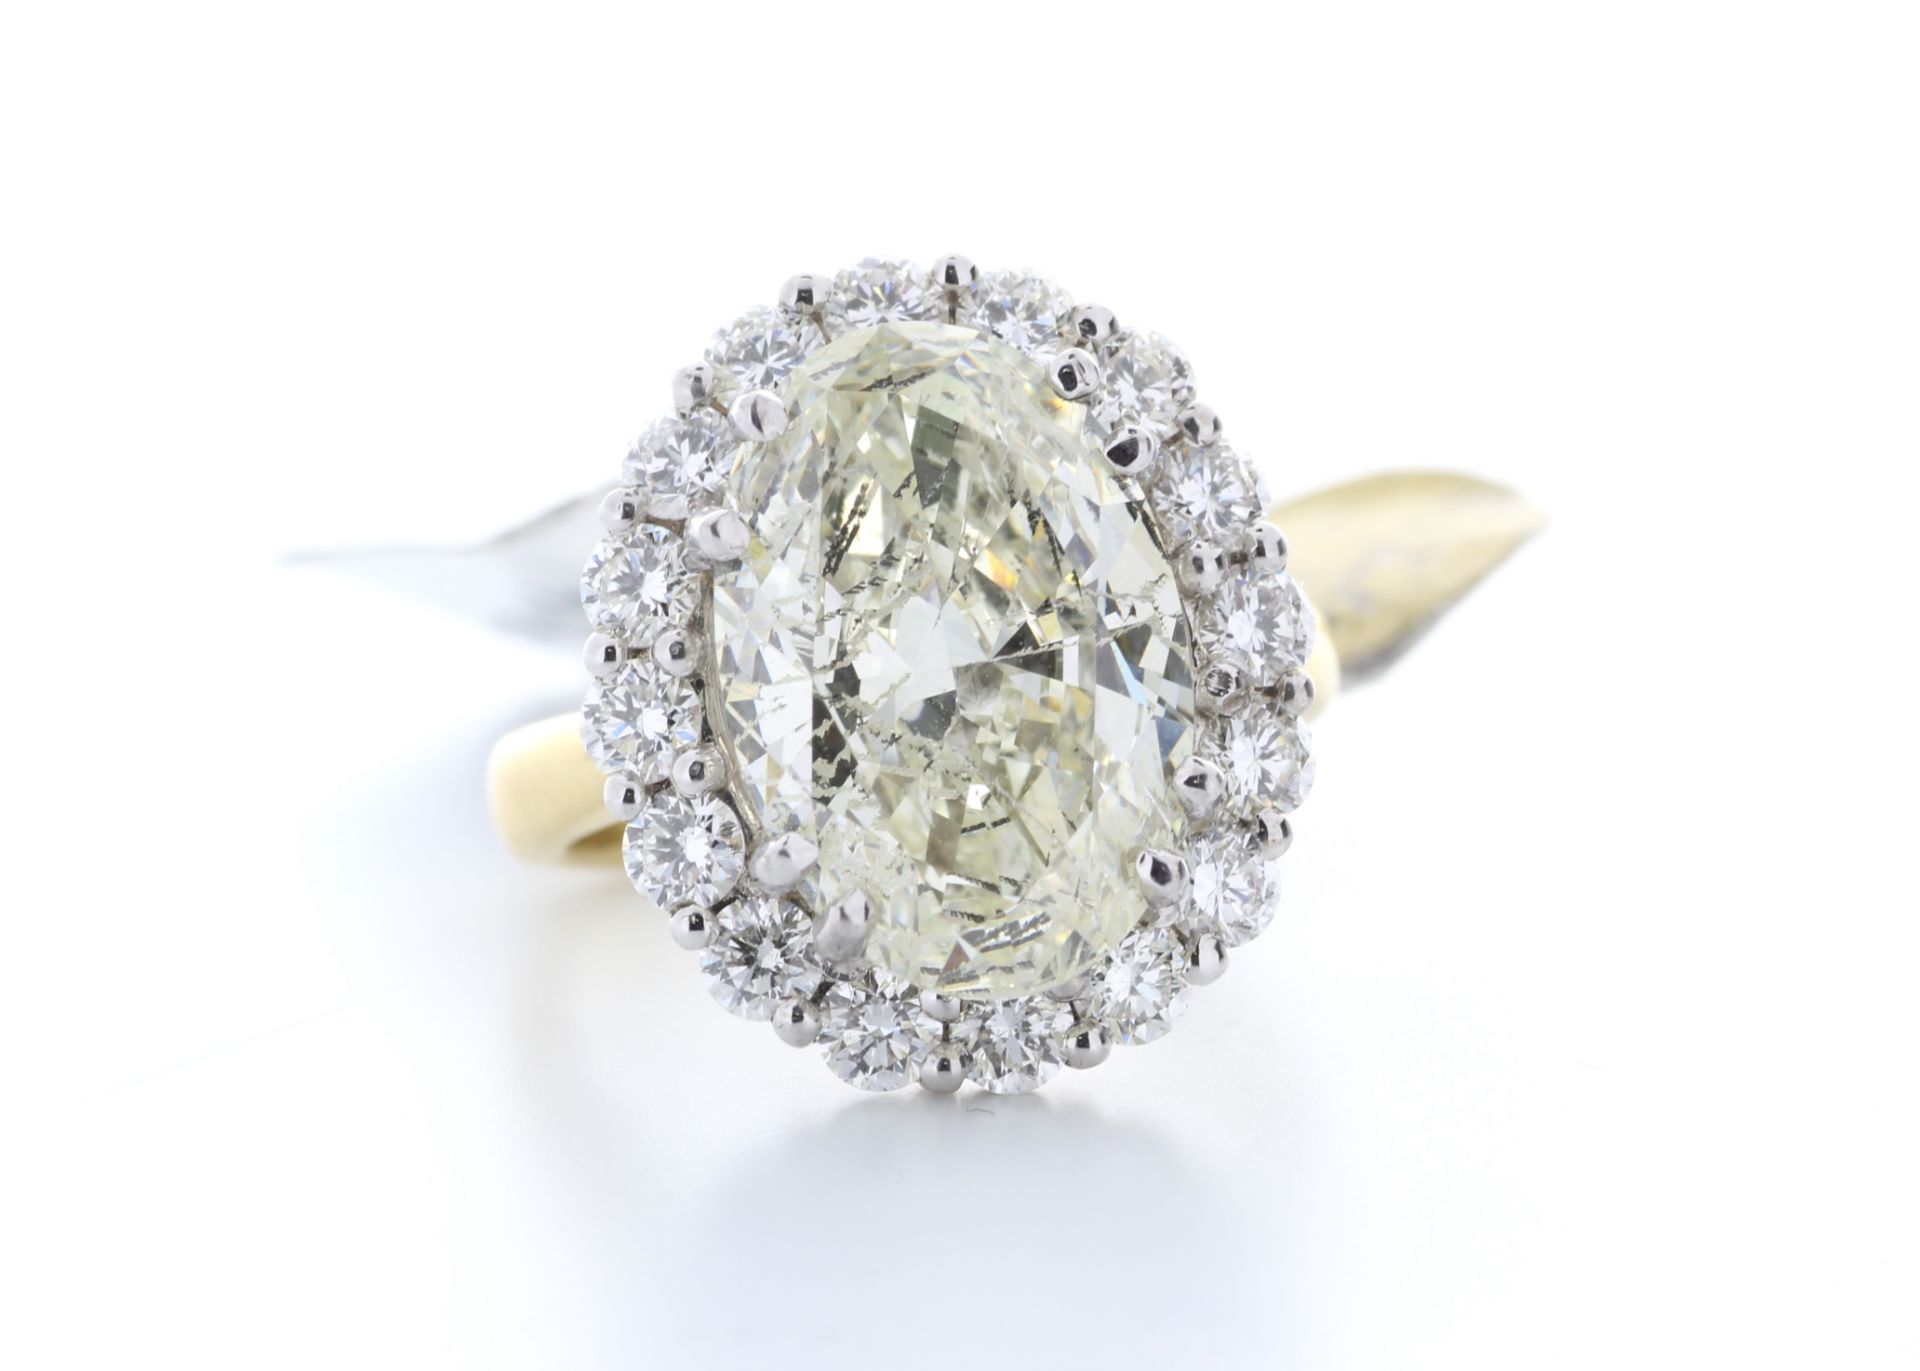 18ct Yellow Gold Single Stone With Halo Setting Ring (6.24 CENTRE STONE) - Image 2 of 2